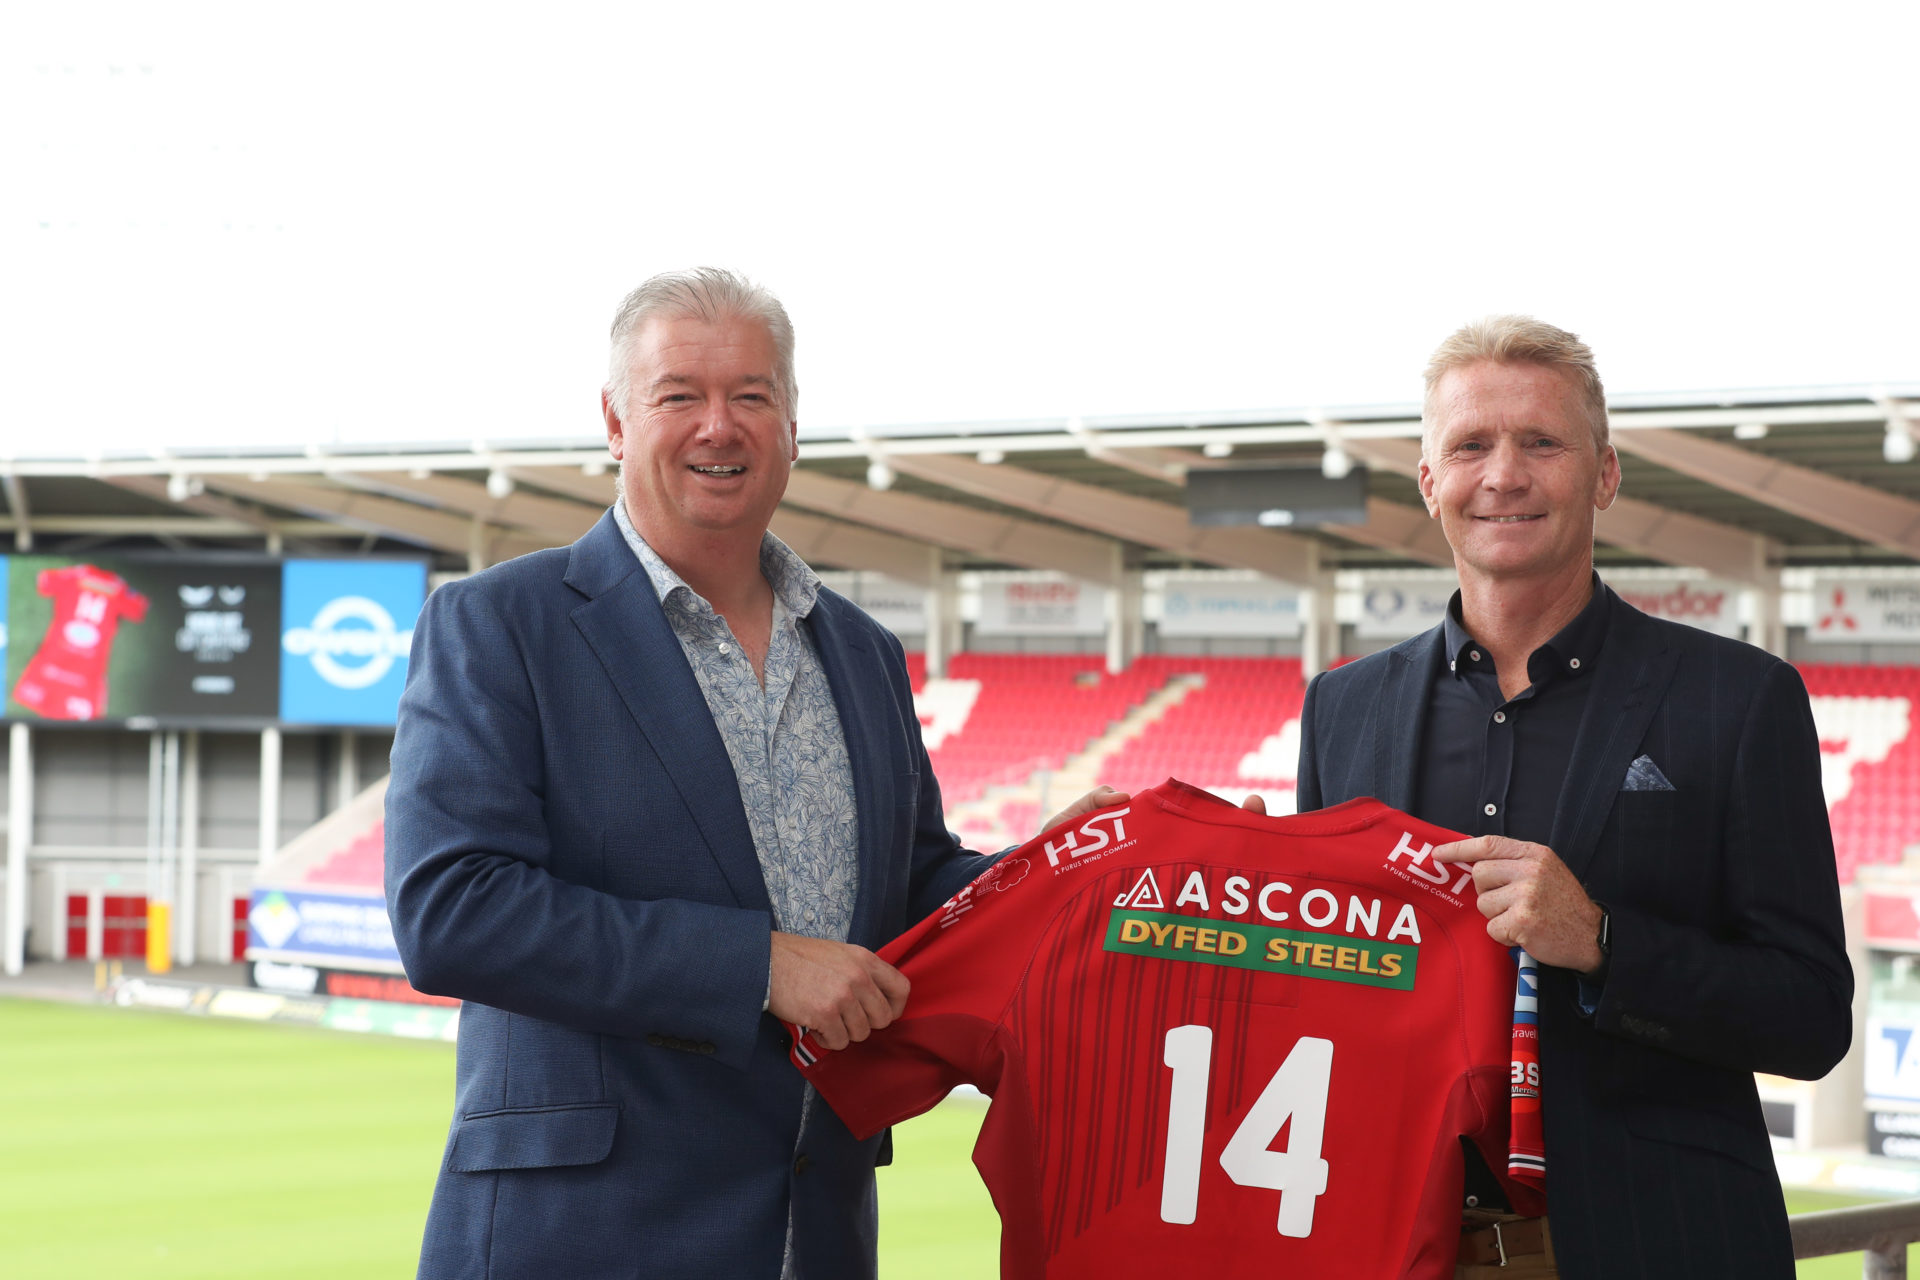 Scarlets welcome Ascona Group as a main partner - Scarlets Rugby